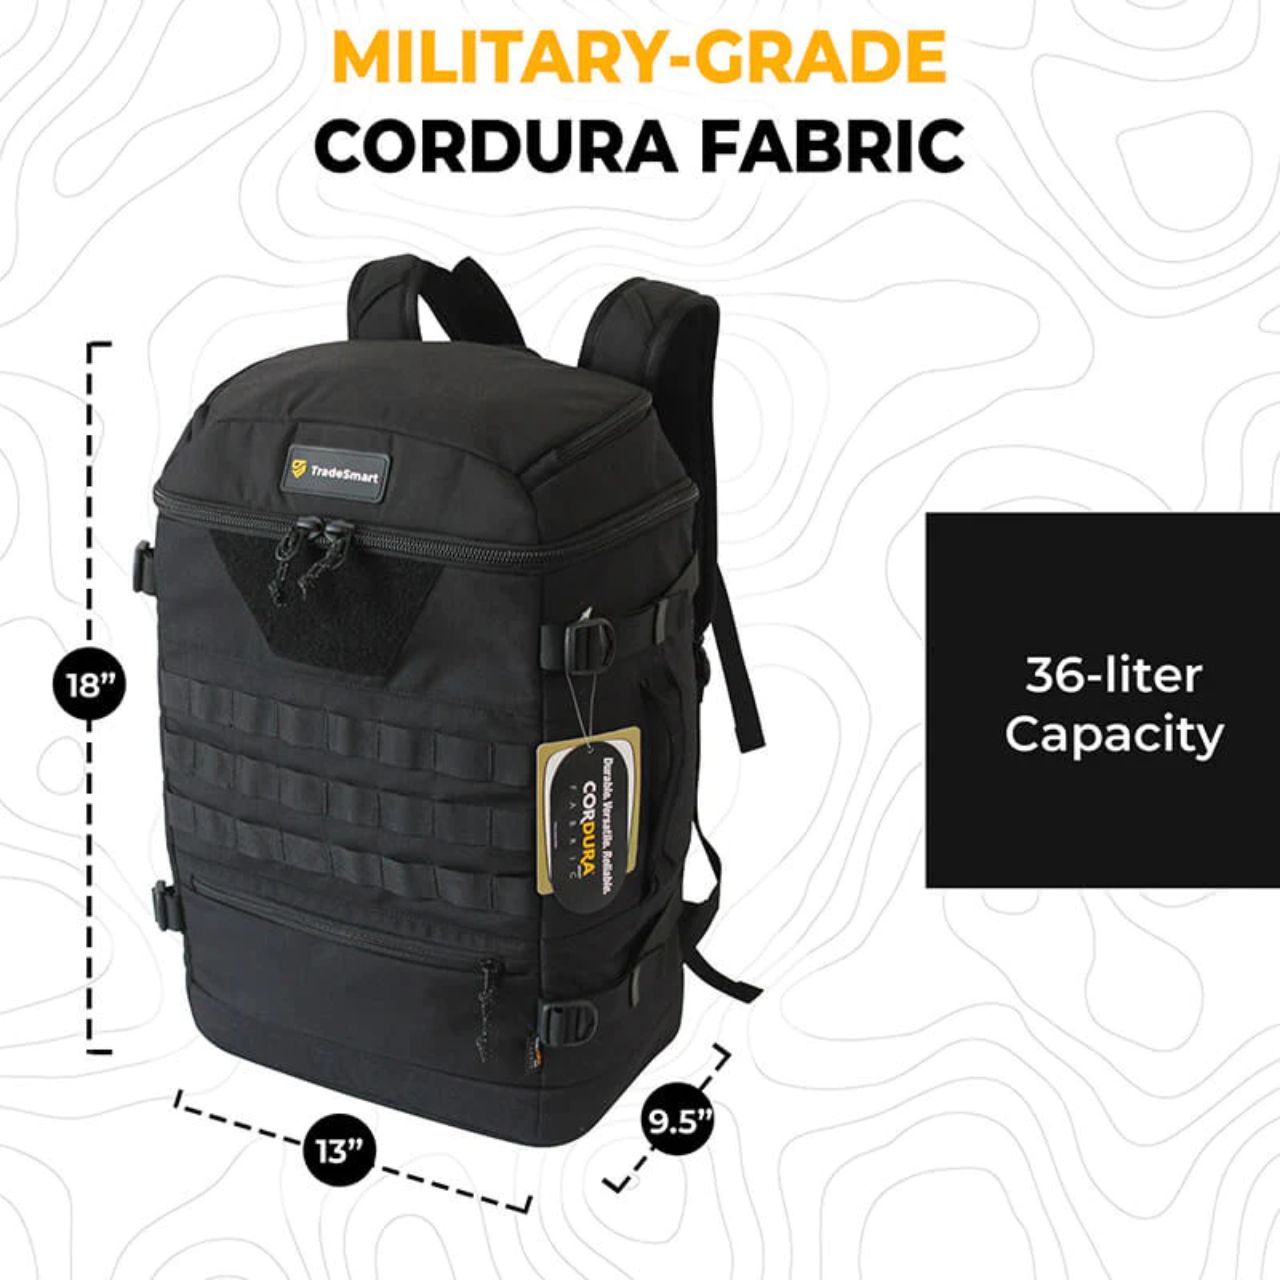 Tactical Backpack is covered in Military grade Cordura fabric